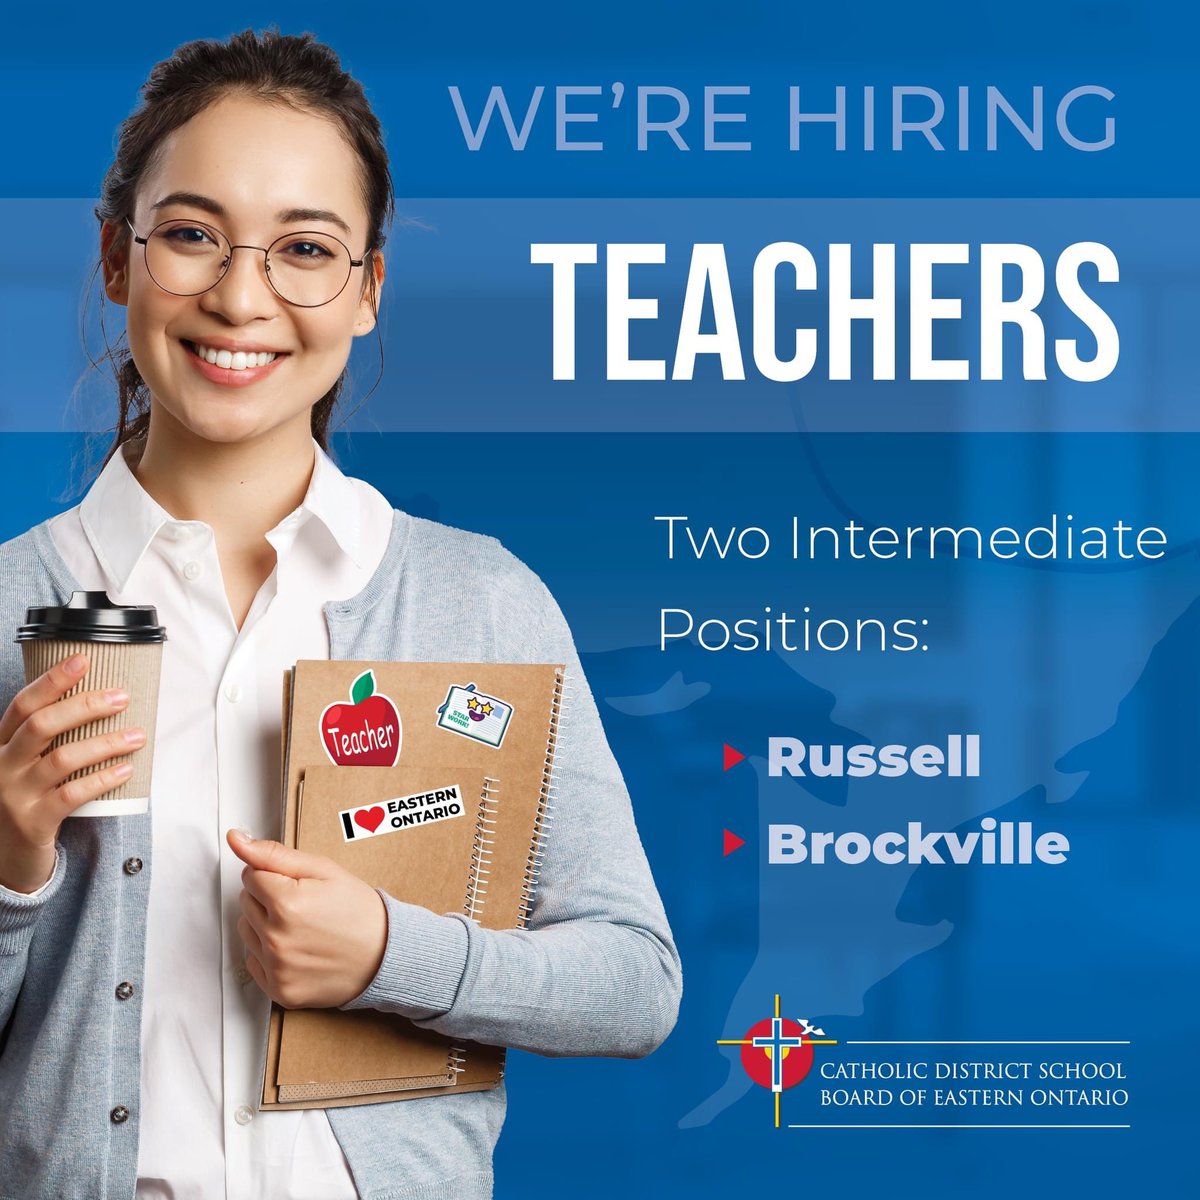 The CDSBEO is currently looking to fill two Intermediate teaching positions located in Brockville and Russell! For full details, please visit: St. Thomas Aquinas CHS, Russell: network.applytoeducation.com/Employer/AttJo… St. Mary CHS, Brockville: network.applytoeducation.com/Employer/AttJo…